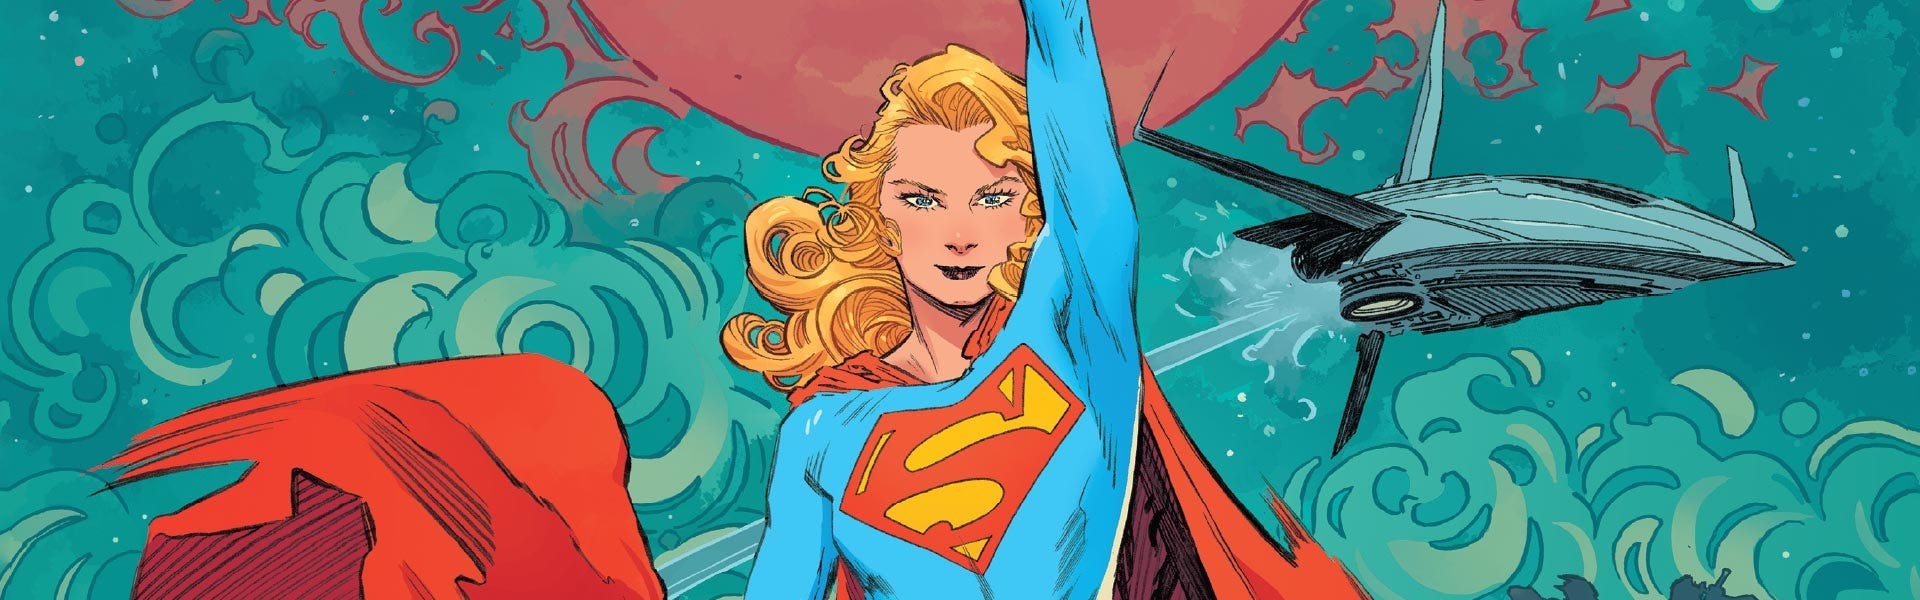 “Supergirl”: Leading Role Actress Found. It’s a “Game of Thrones” Star